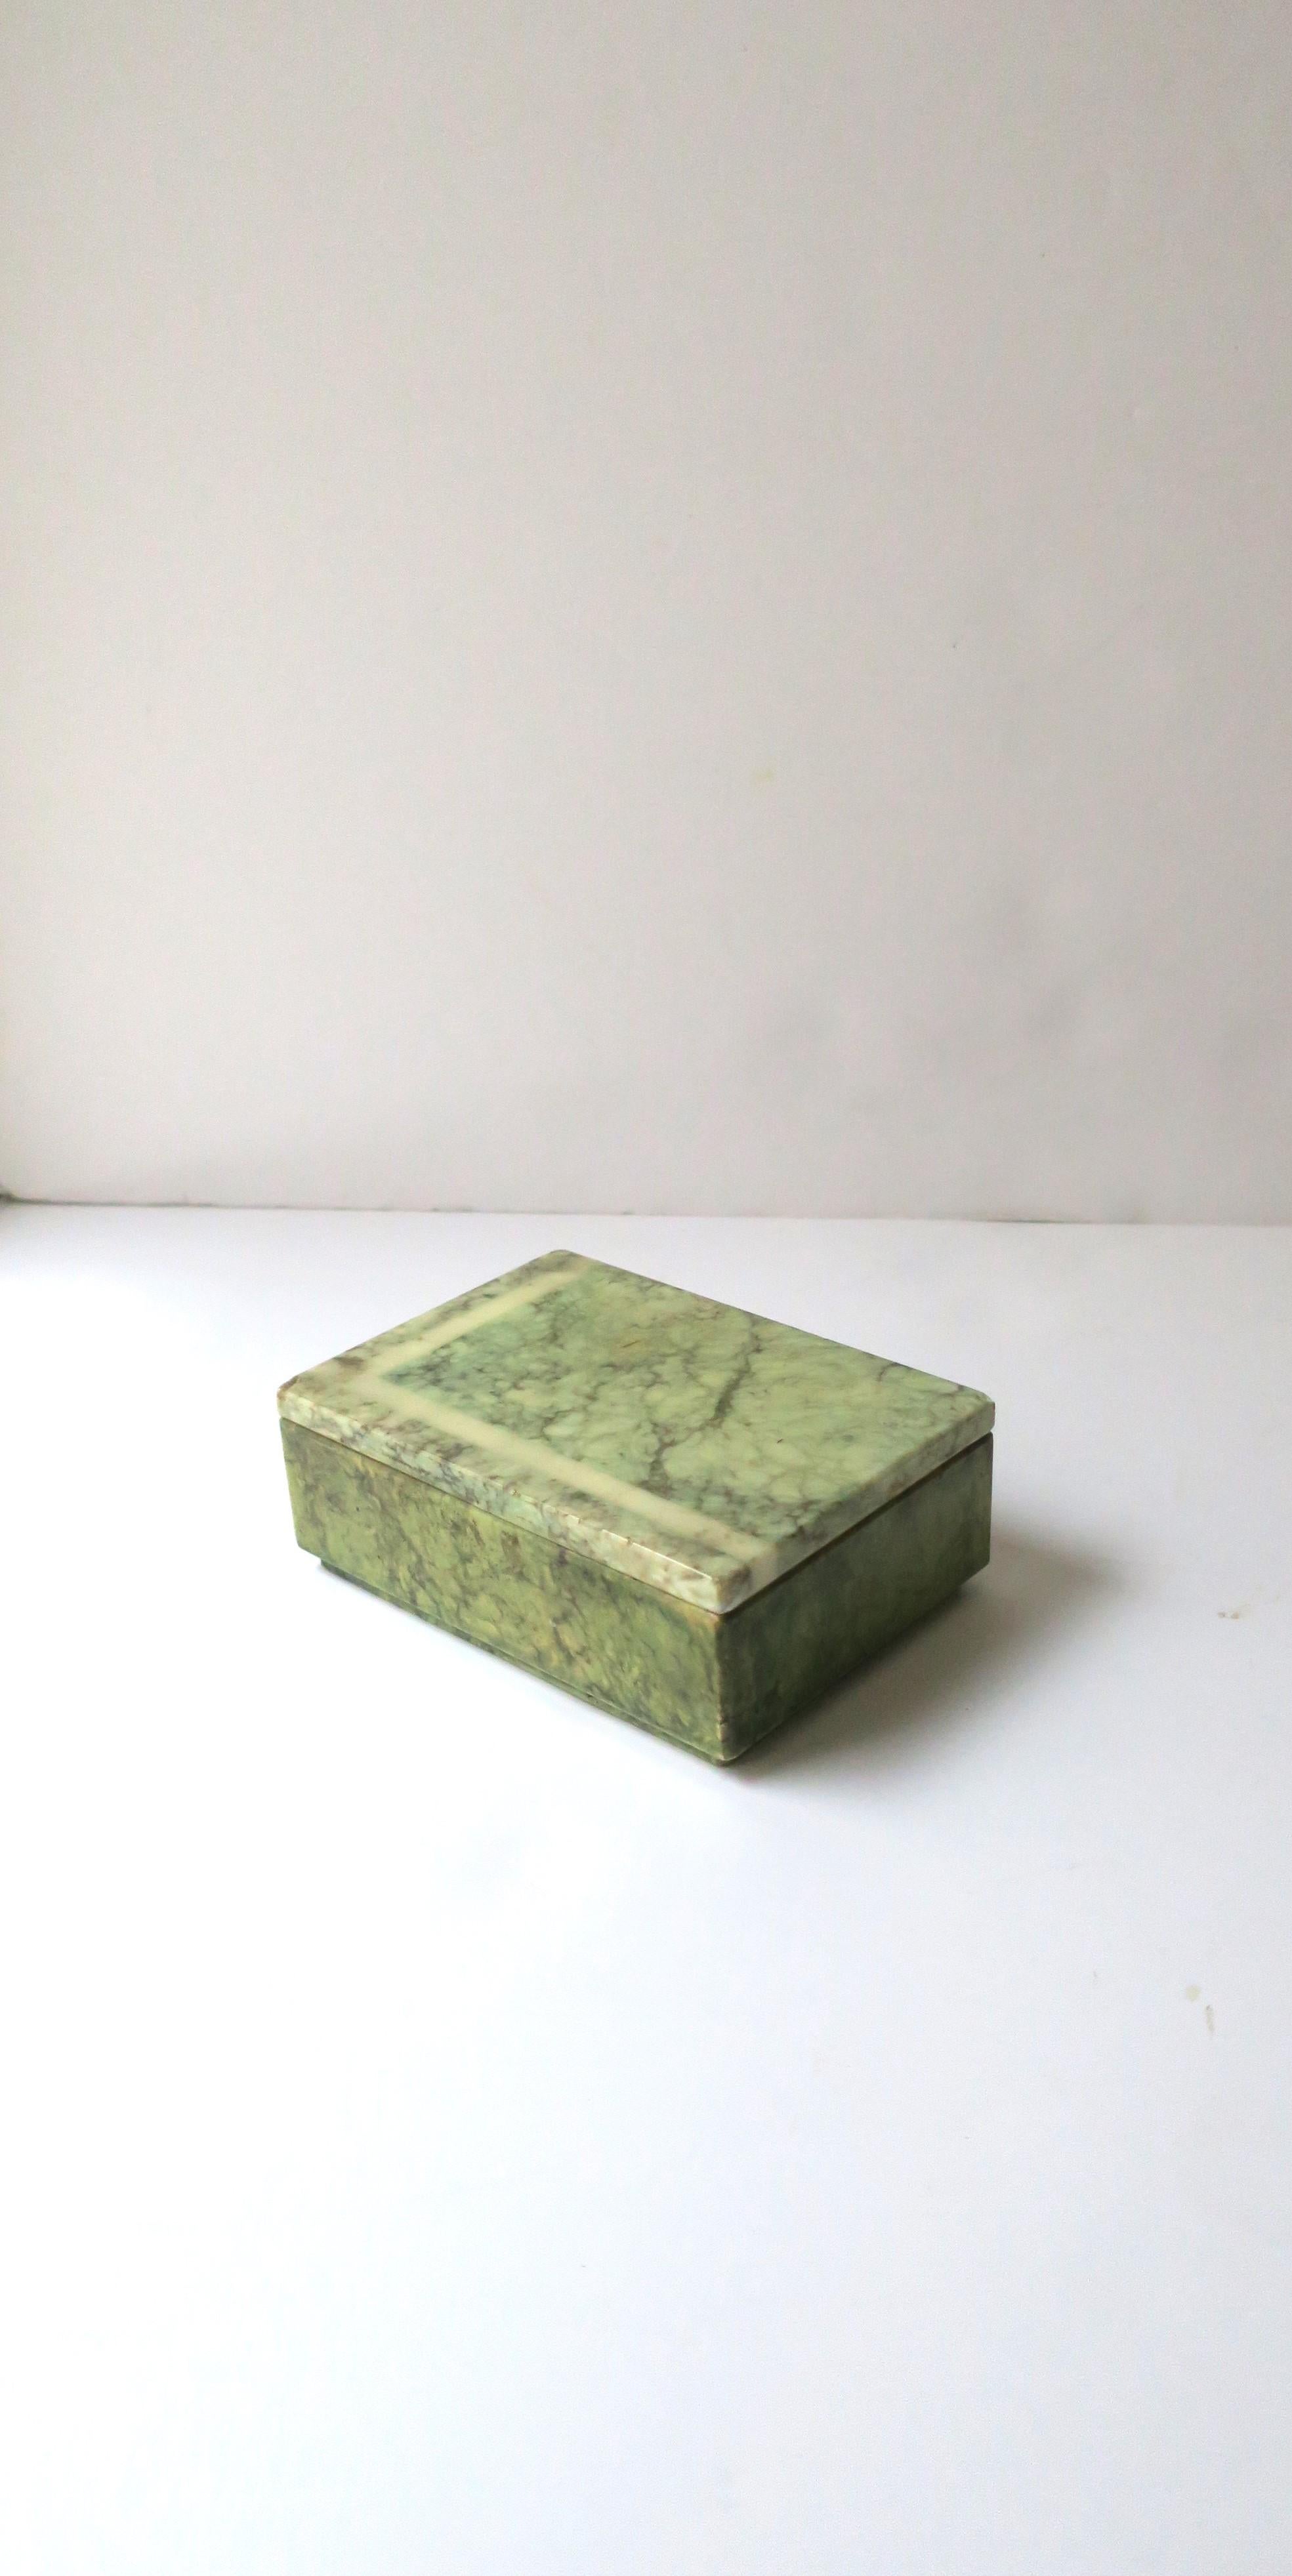 An Italian '70s modern green alabaster marble jewelry box, circa 1970s, Italy. Great as a standalone piece, for jewelry (as demonstrated), or other items on a nightstand table, vanity, console, desk, walk-in-closet, etc. Hues include greens, black,